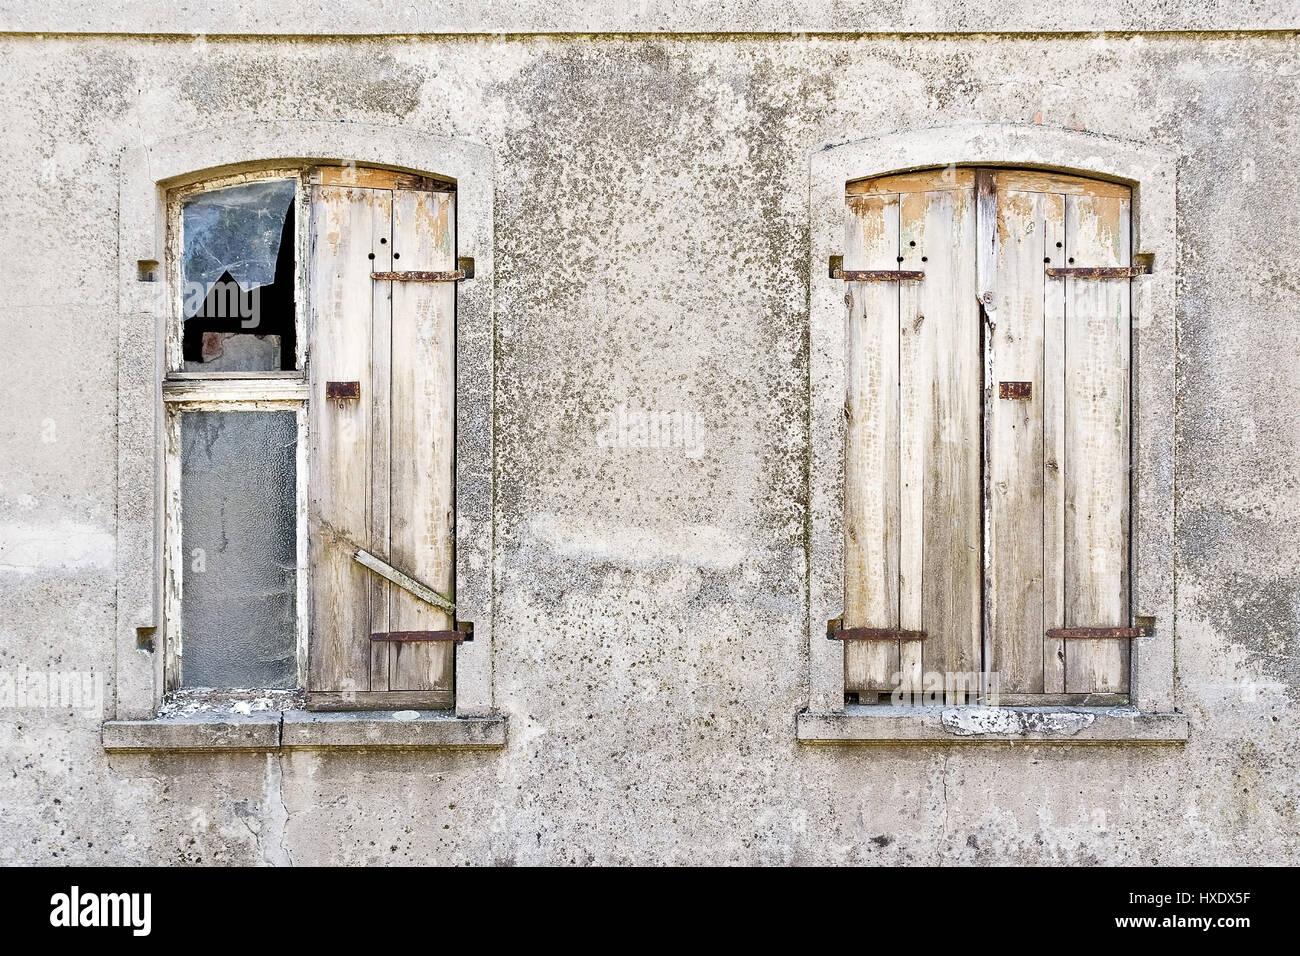 Window with shutter of an old house, Windows with shutters of in old house |, Fenster mit Fensterladen von einem alten Haus |Windows with shutters of  Stock Photo